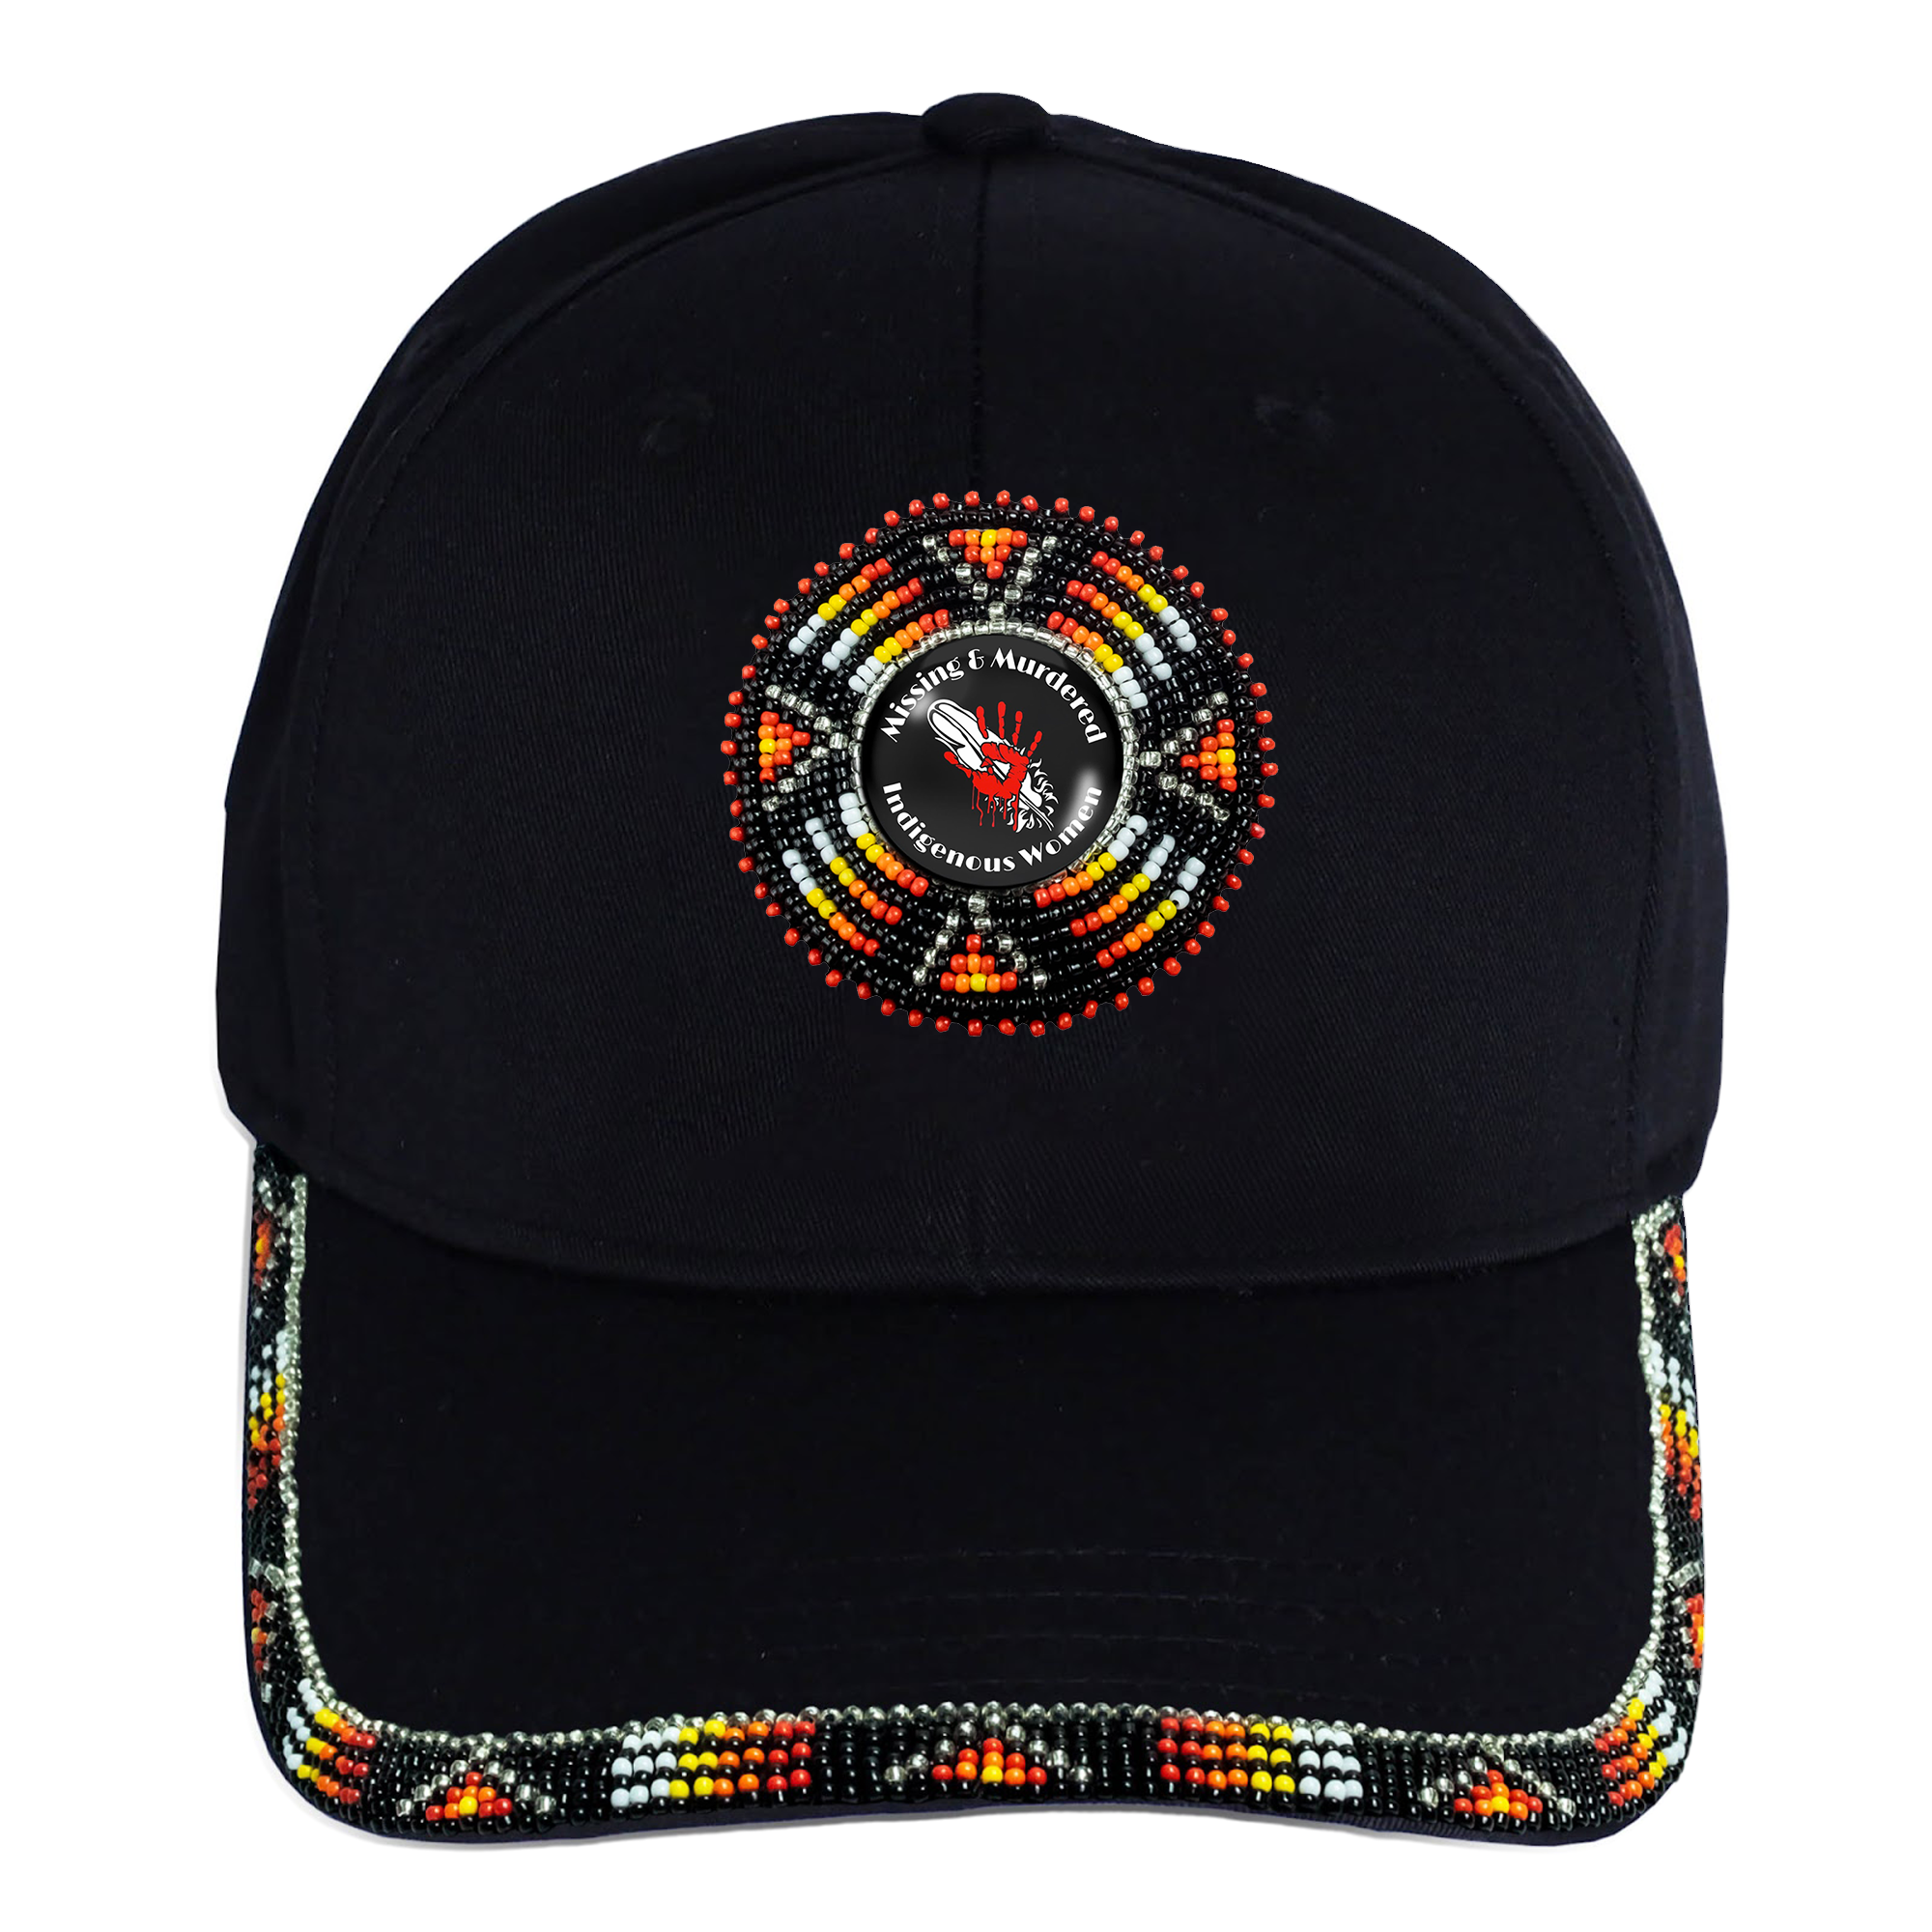 SALE 50% OFF - Red Hand Baseball Cap With Patch And A Colorful Beaded Brim Native American Style